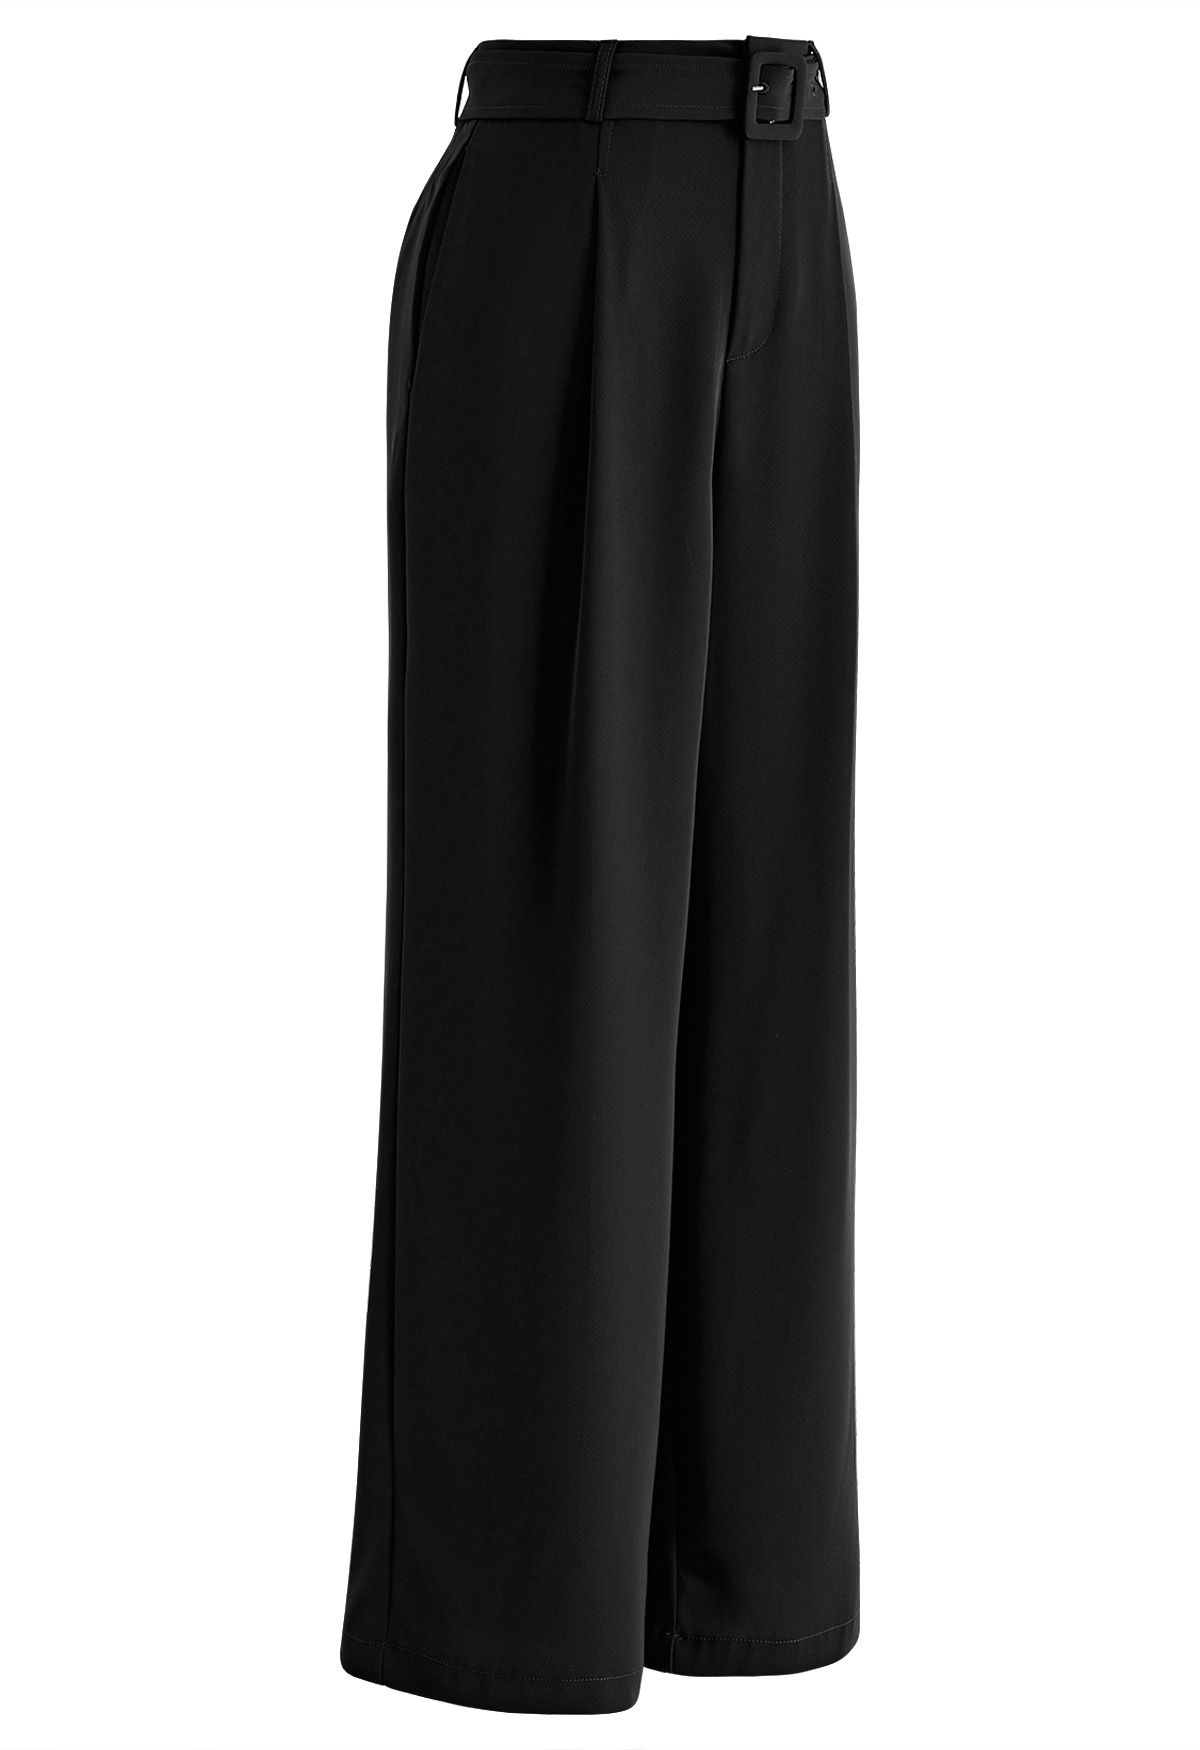 Sleek Belted Straight-Leg Pants in Black - Retro, Indie and Unique Fashion